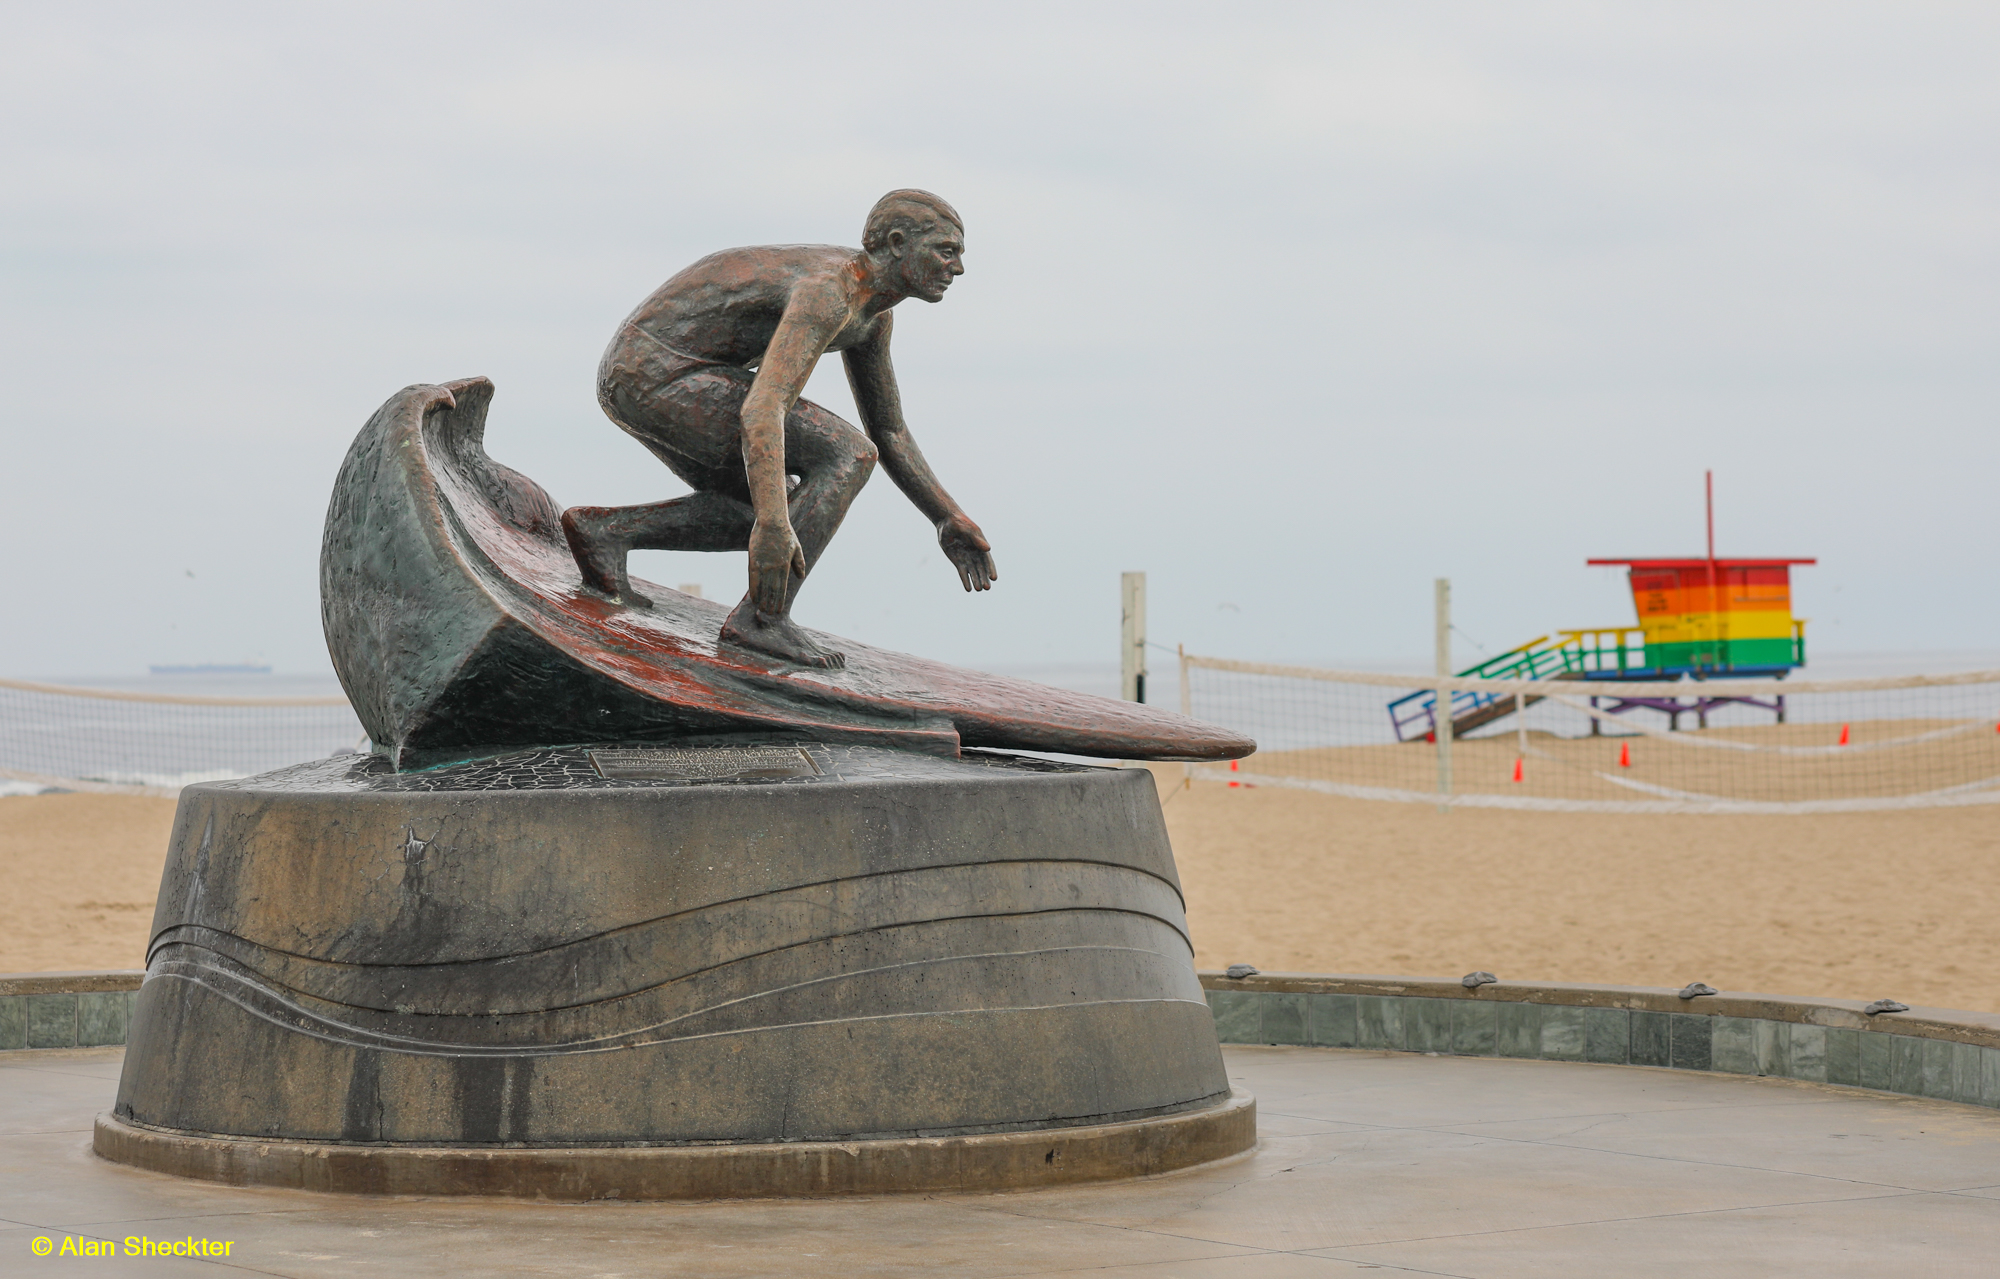 The BeachLife is evident at Hermosa Pier, where this Tim Kelly Lifeguard Memorial stands, about one mile from the festival grounds.